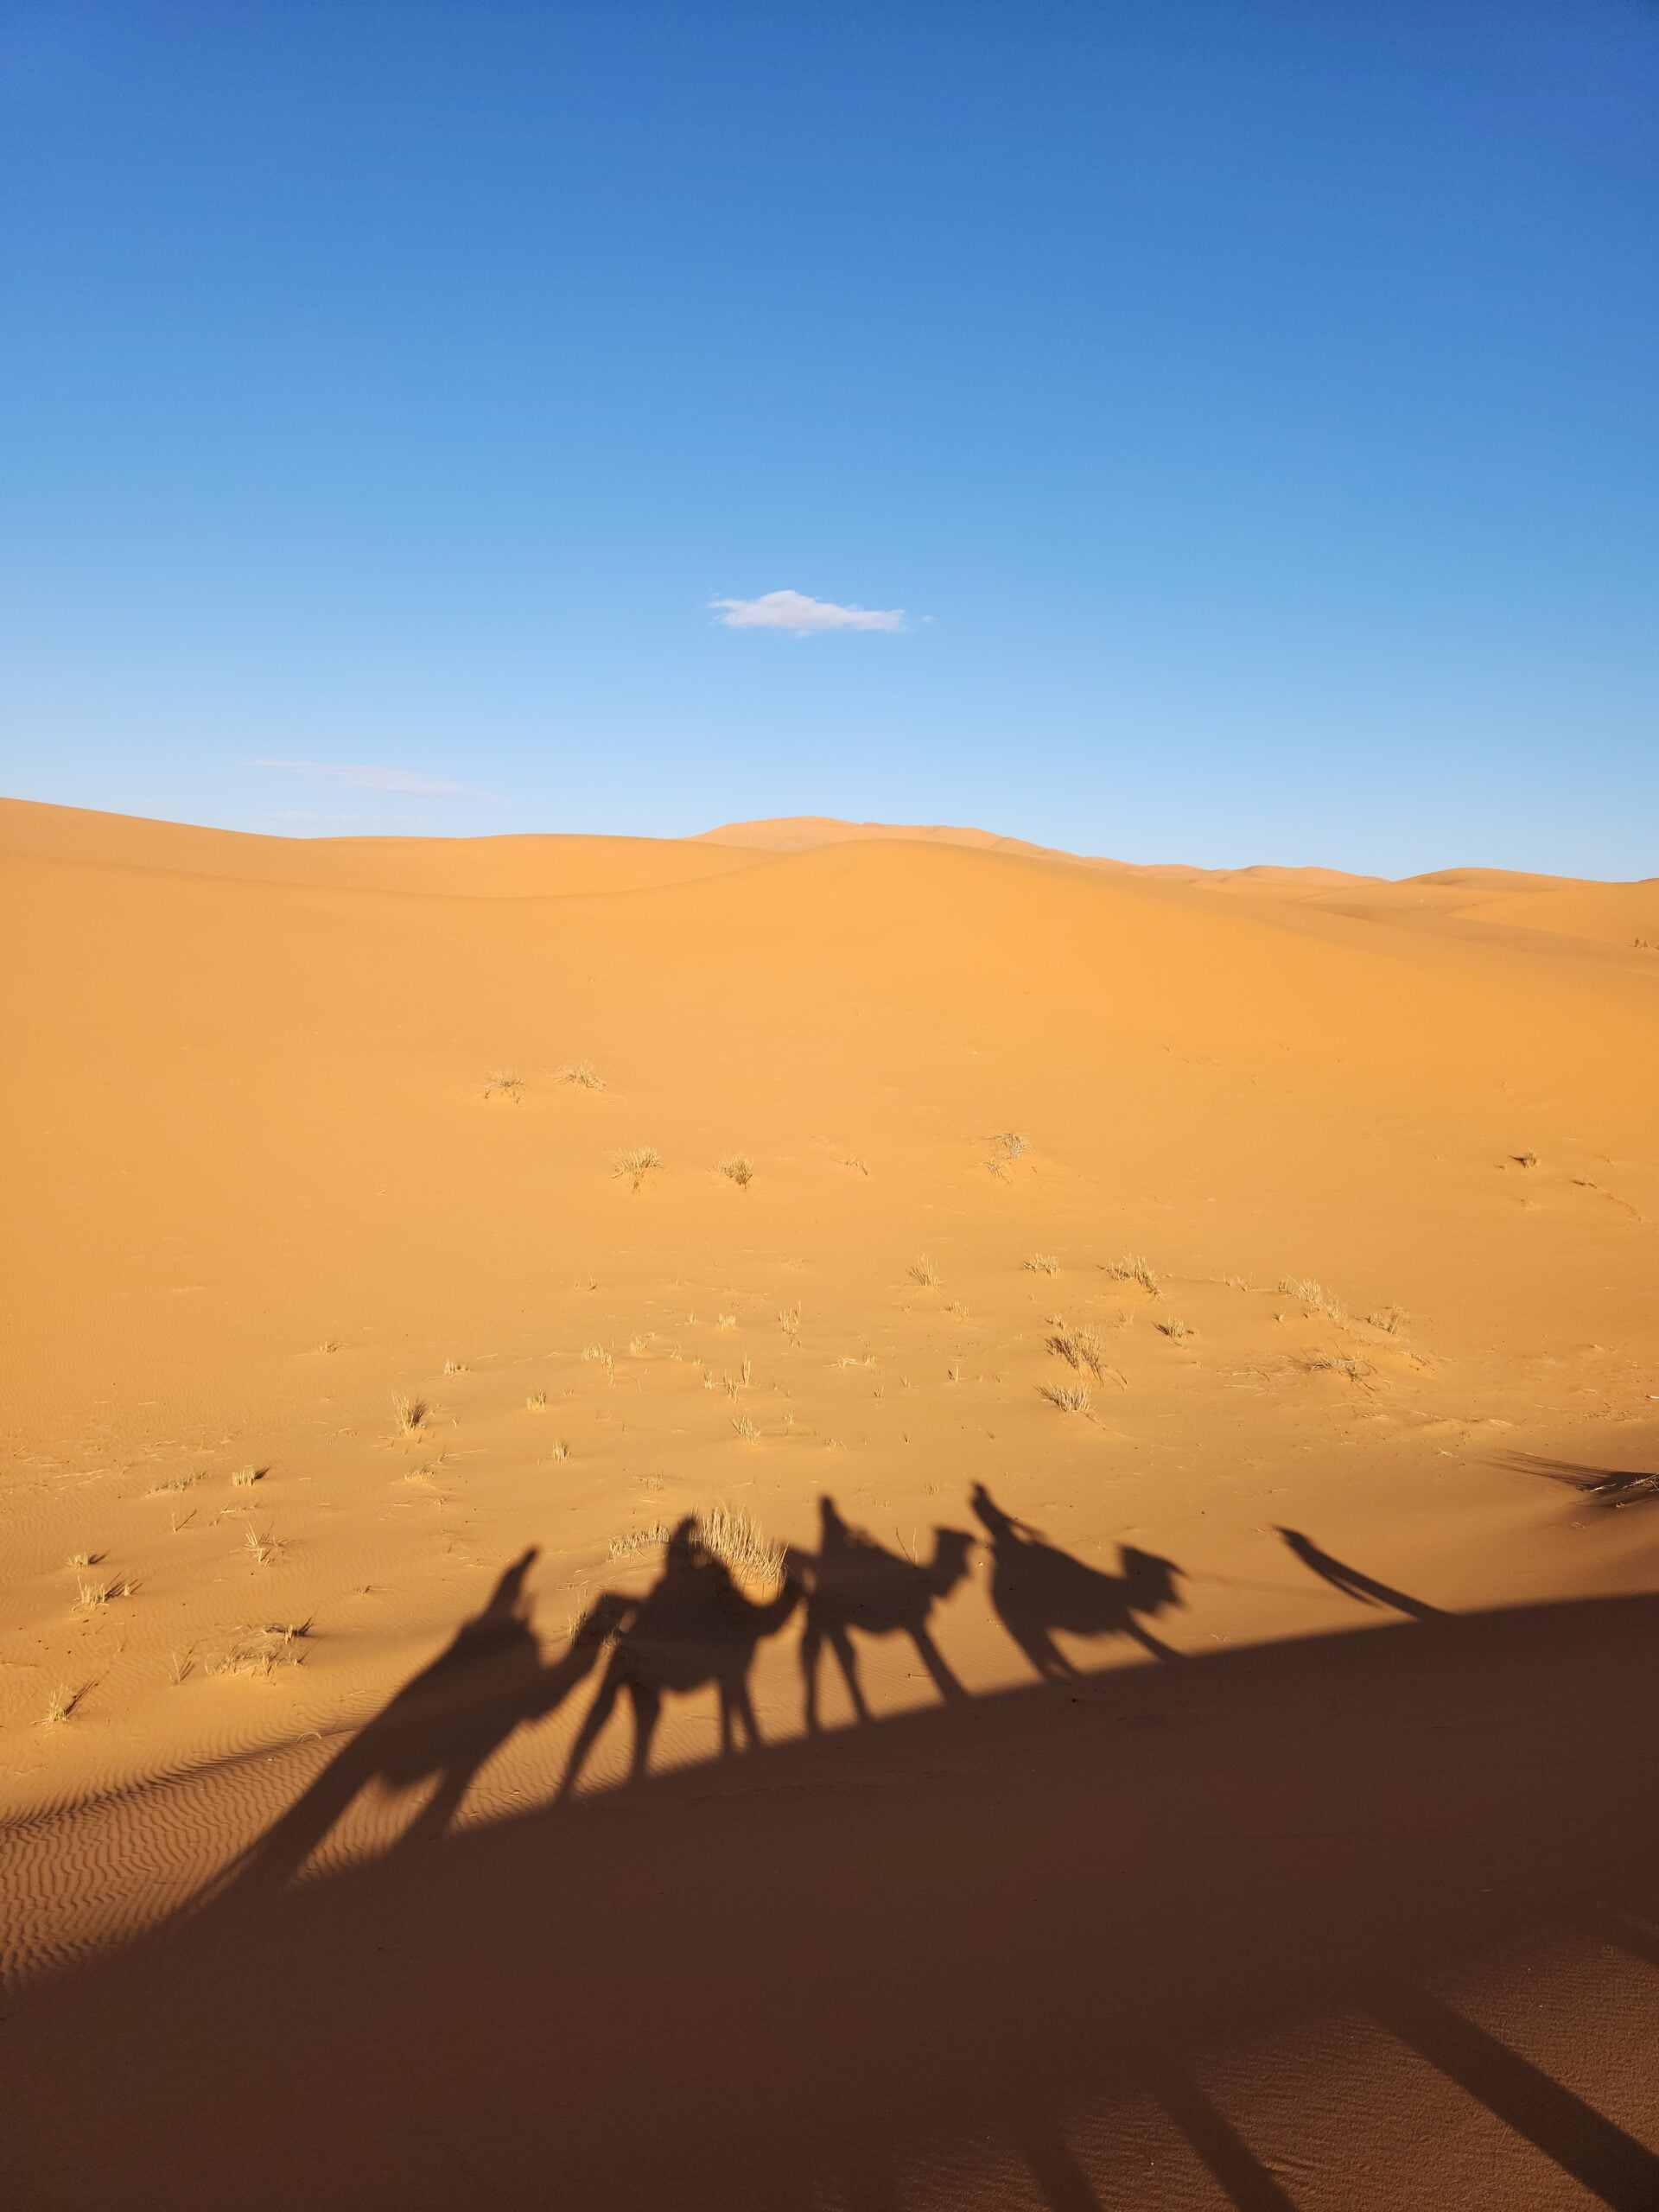 Aerial view from a dune in the Sahara Desert showing the elongated shadows of a caravan of camels and their riders against the desert landscape.